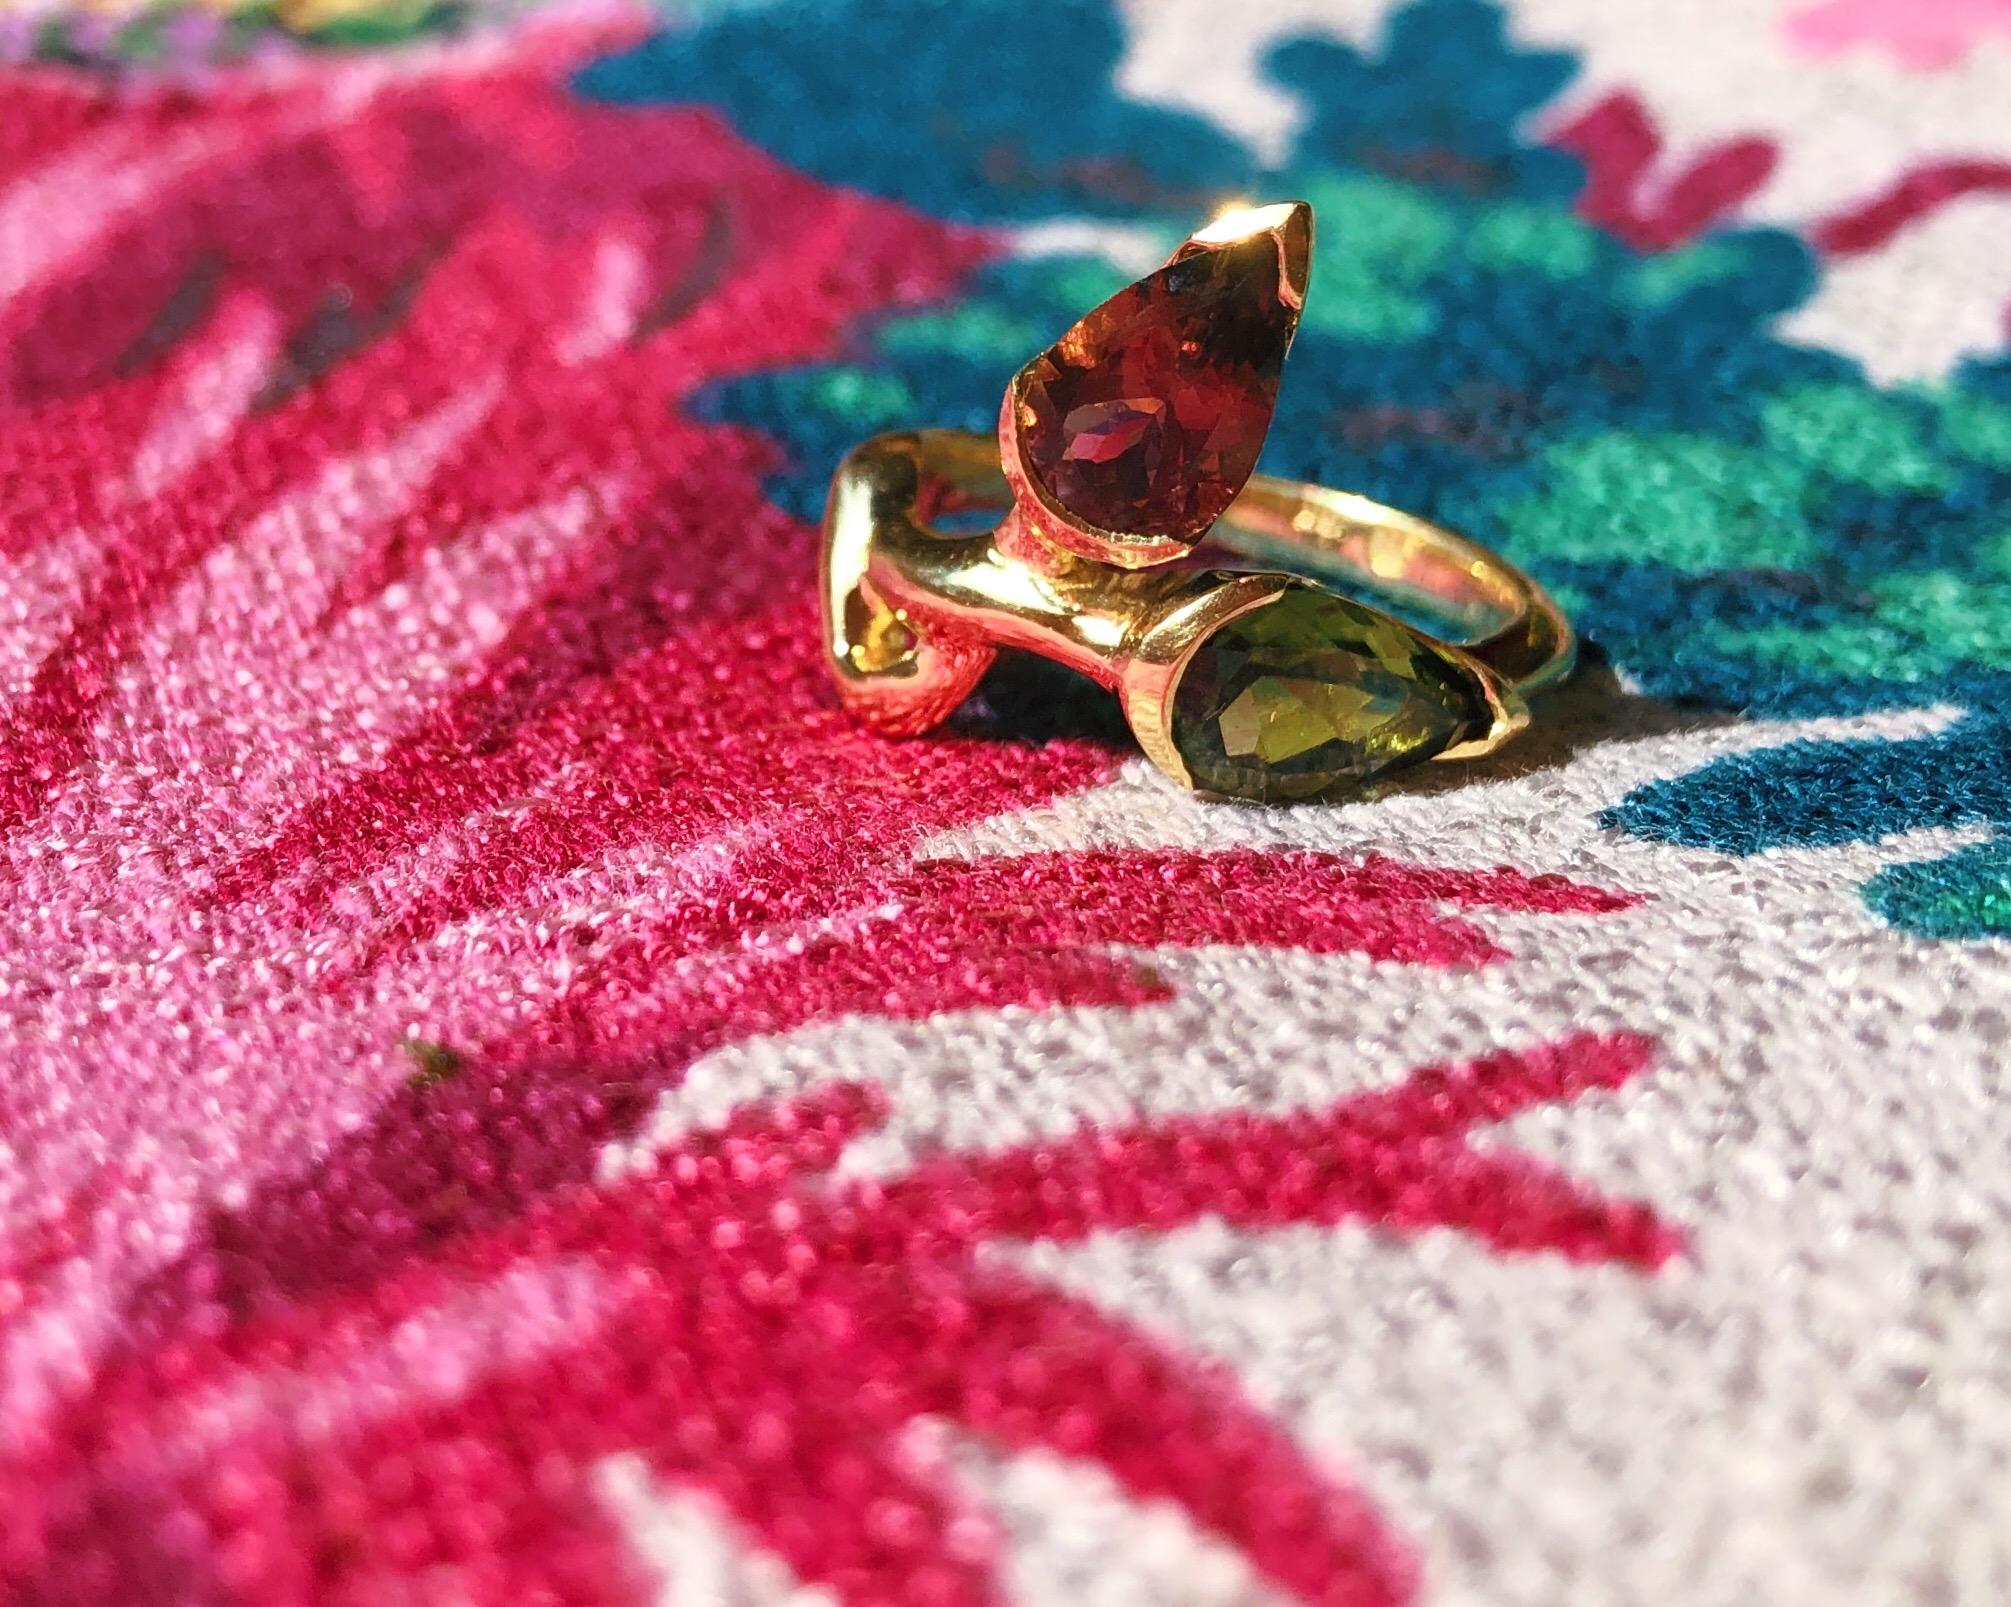 The Rosebud Ring with Pink and Green Tourmaline from modern fine jewelry house, Baker & Black. Artful with just a touch of whimsy, this pear shaped tourmaline ring brings distinction to any getup. 

• pink tourmaline
• green tourmaline
• measures